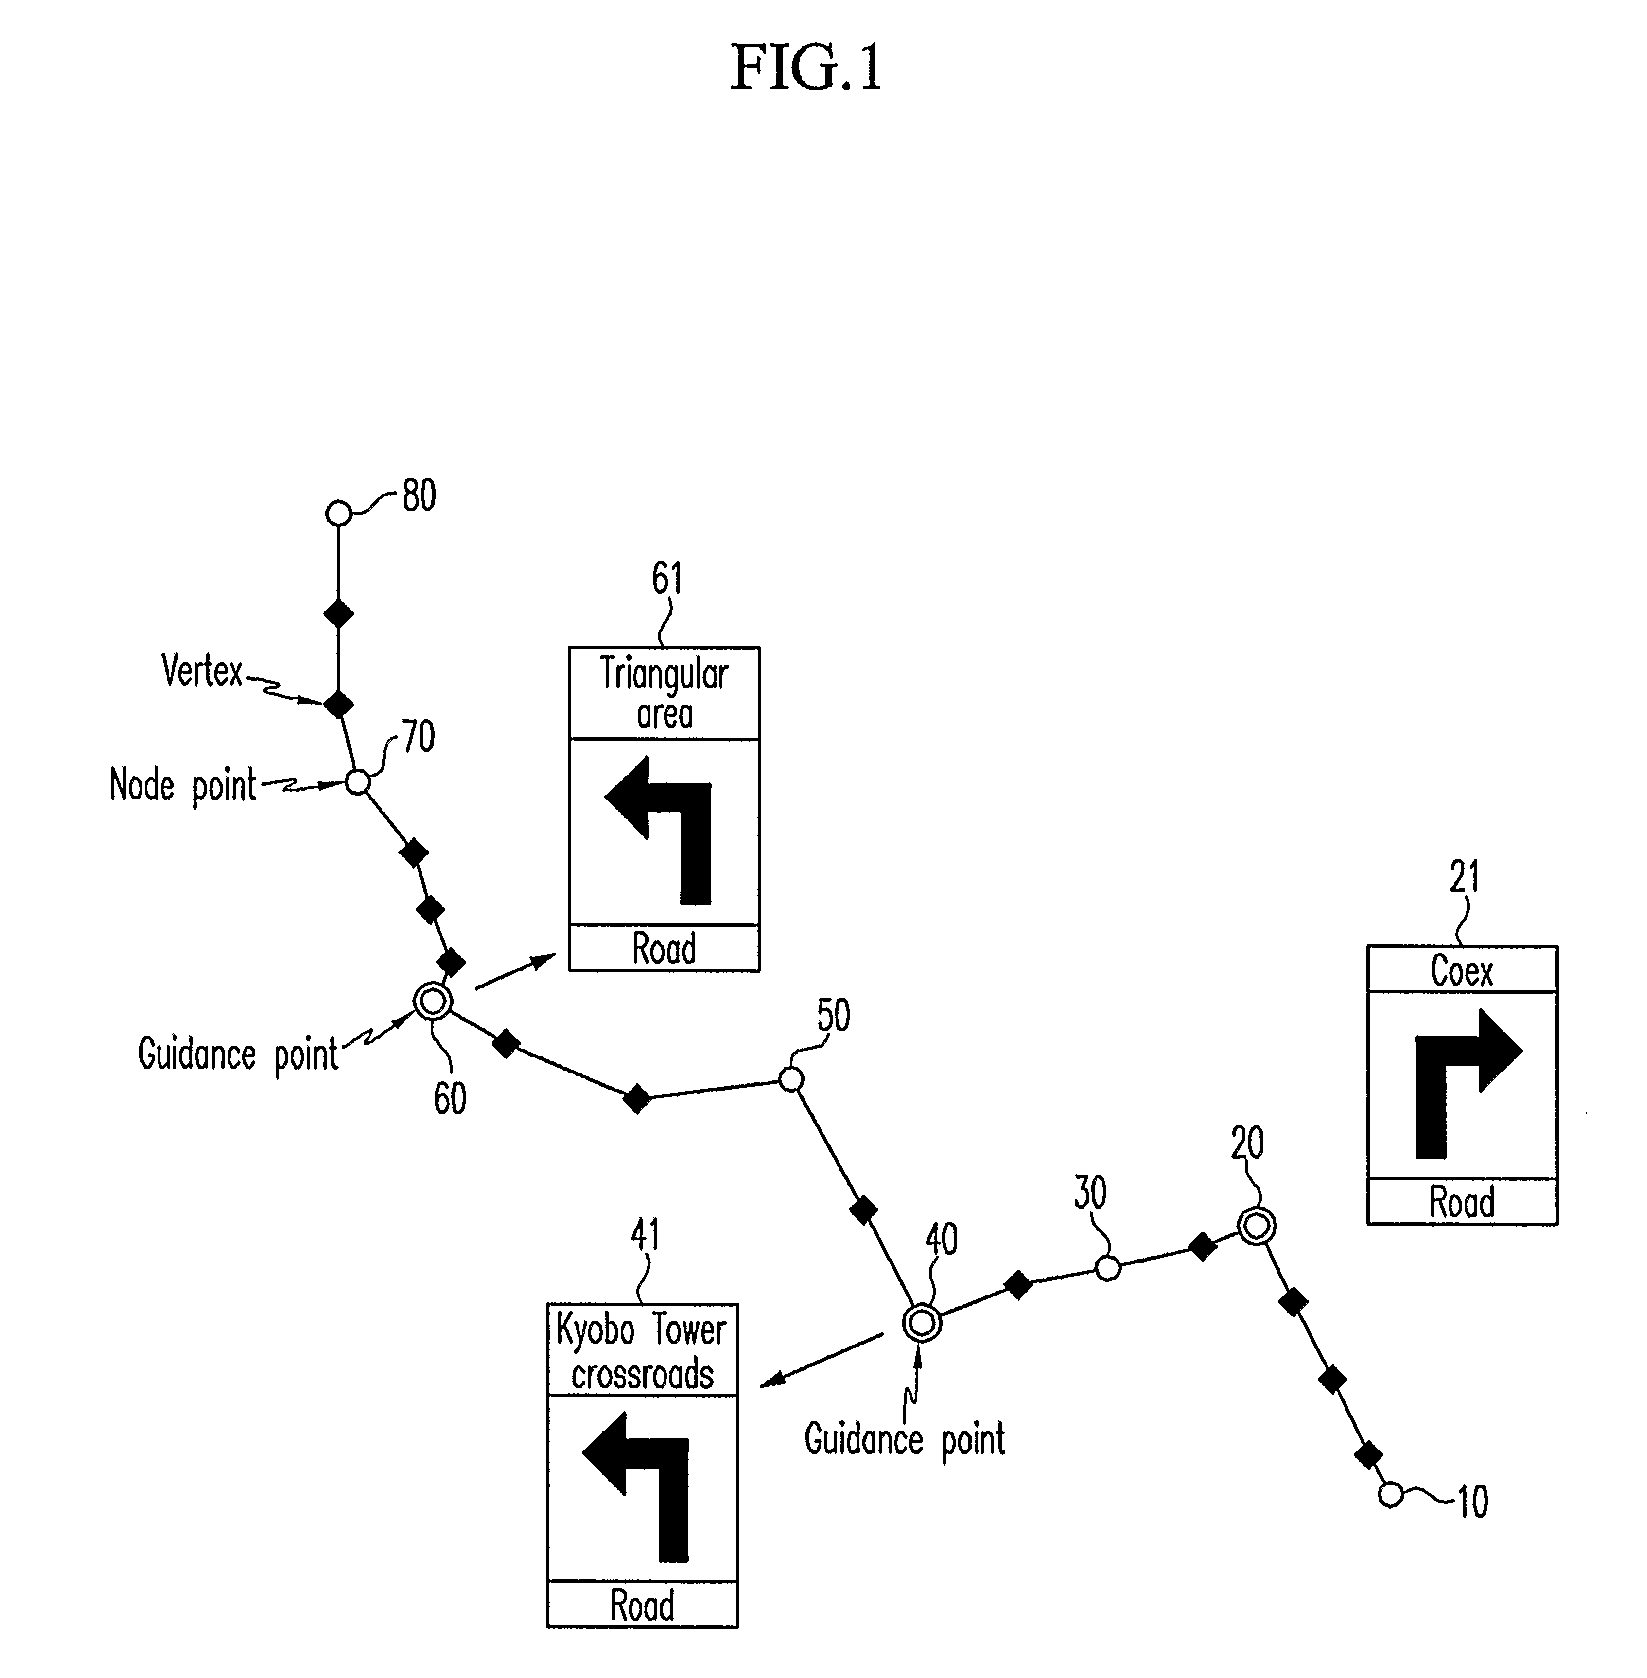 System and Method for Providing Telematics Service